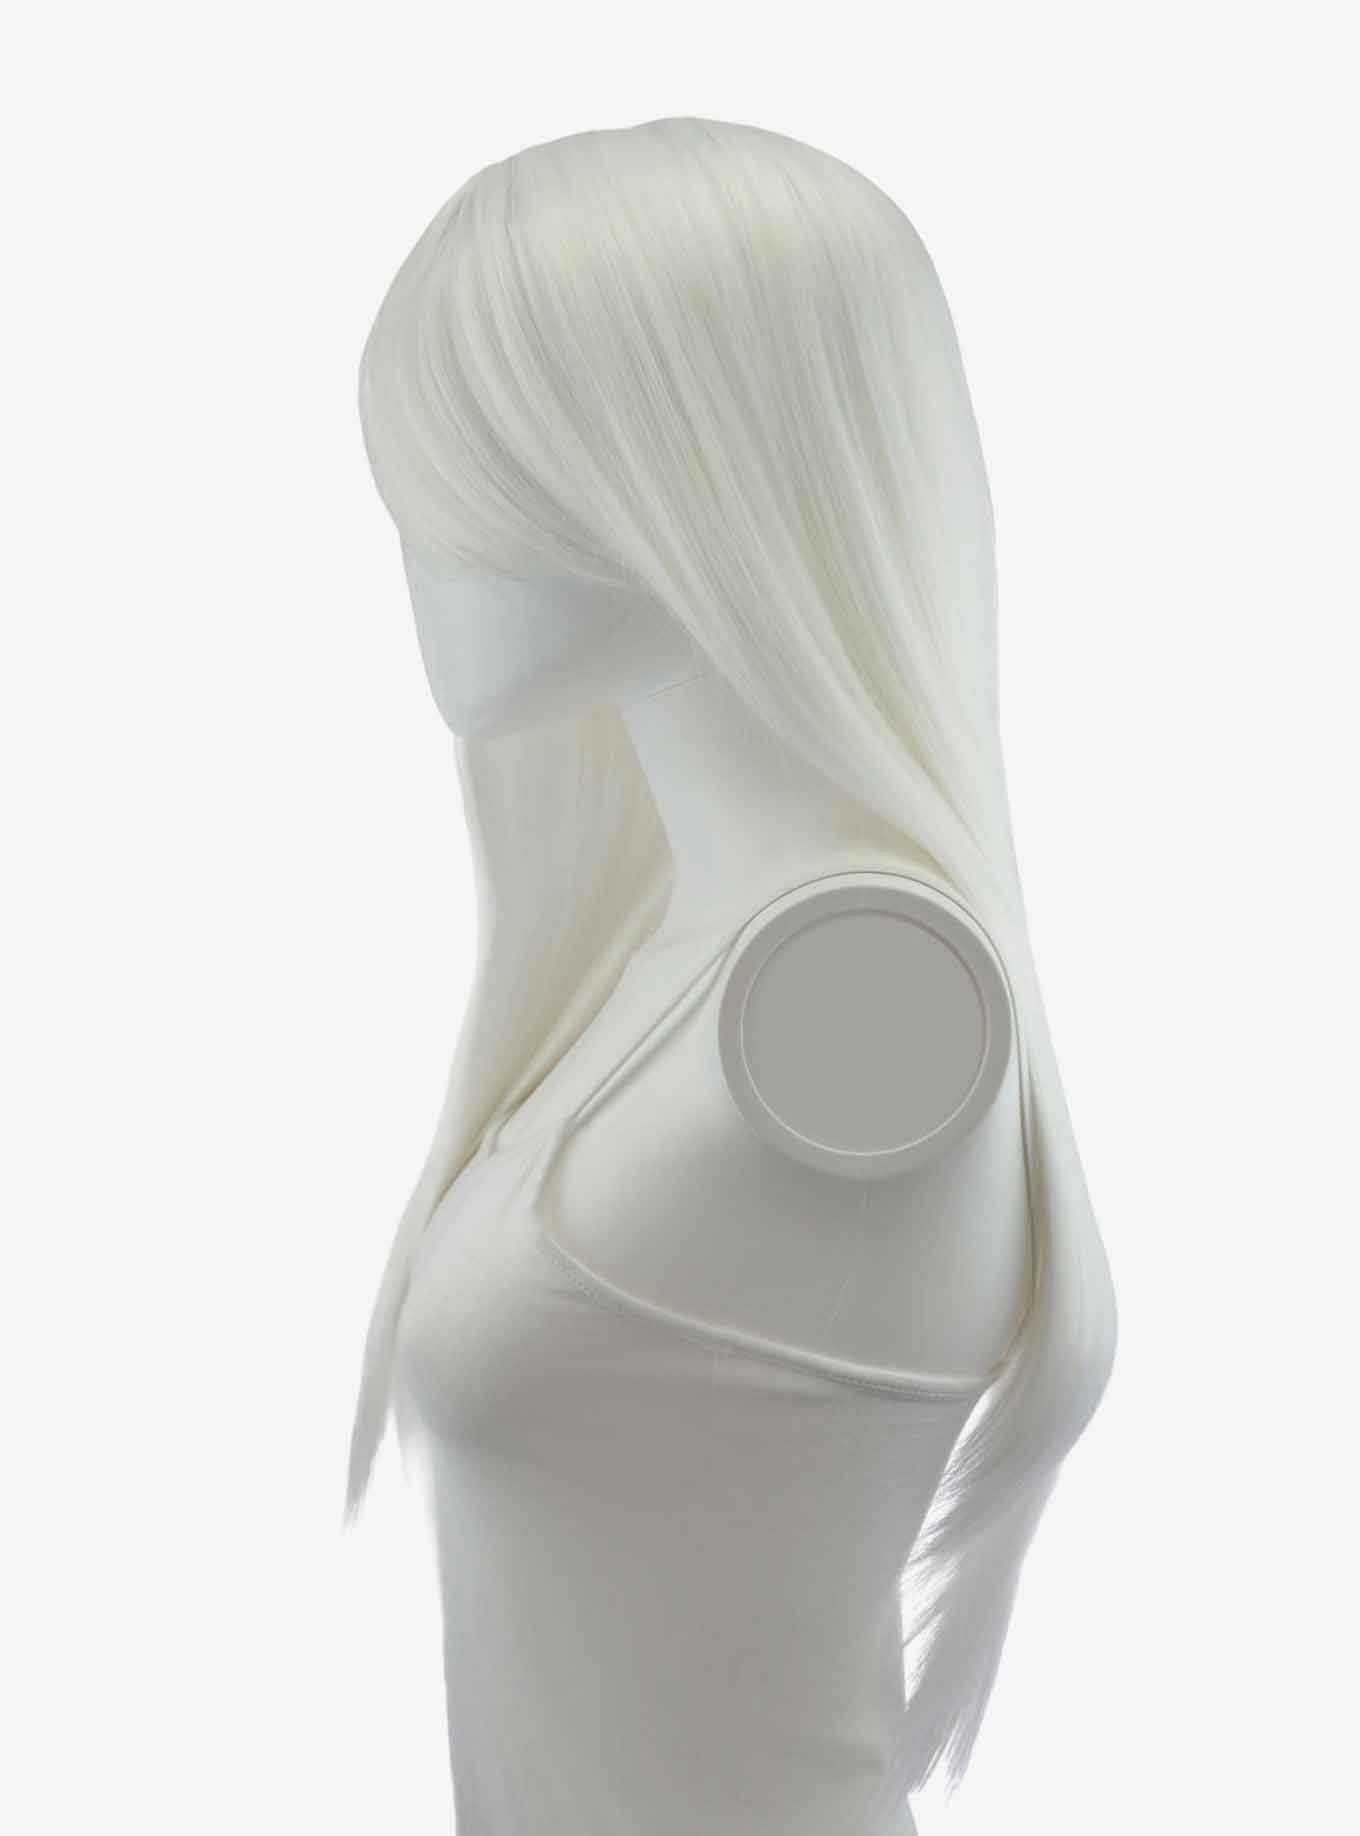 Epic Cosplay Nyx Classic White Long Straight Wig, , hi-res